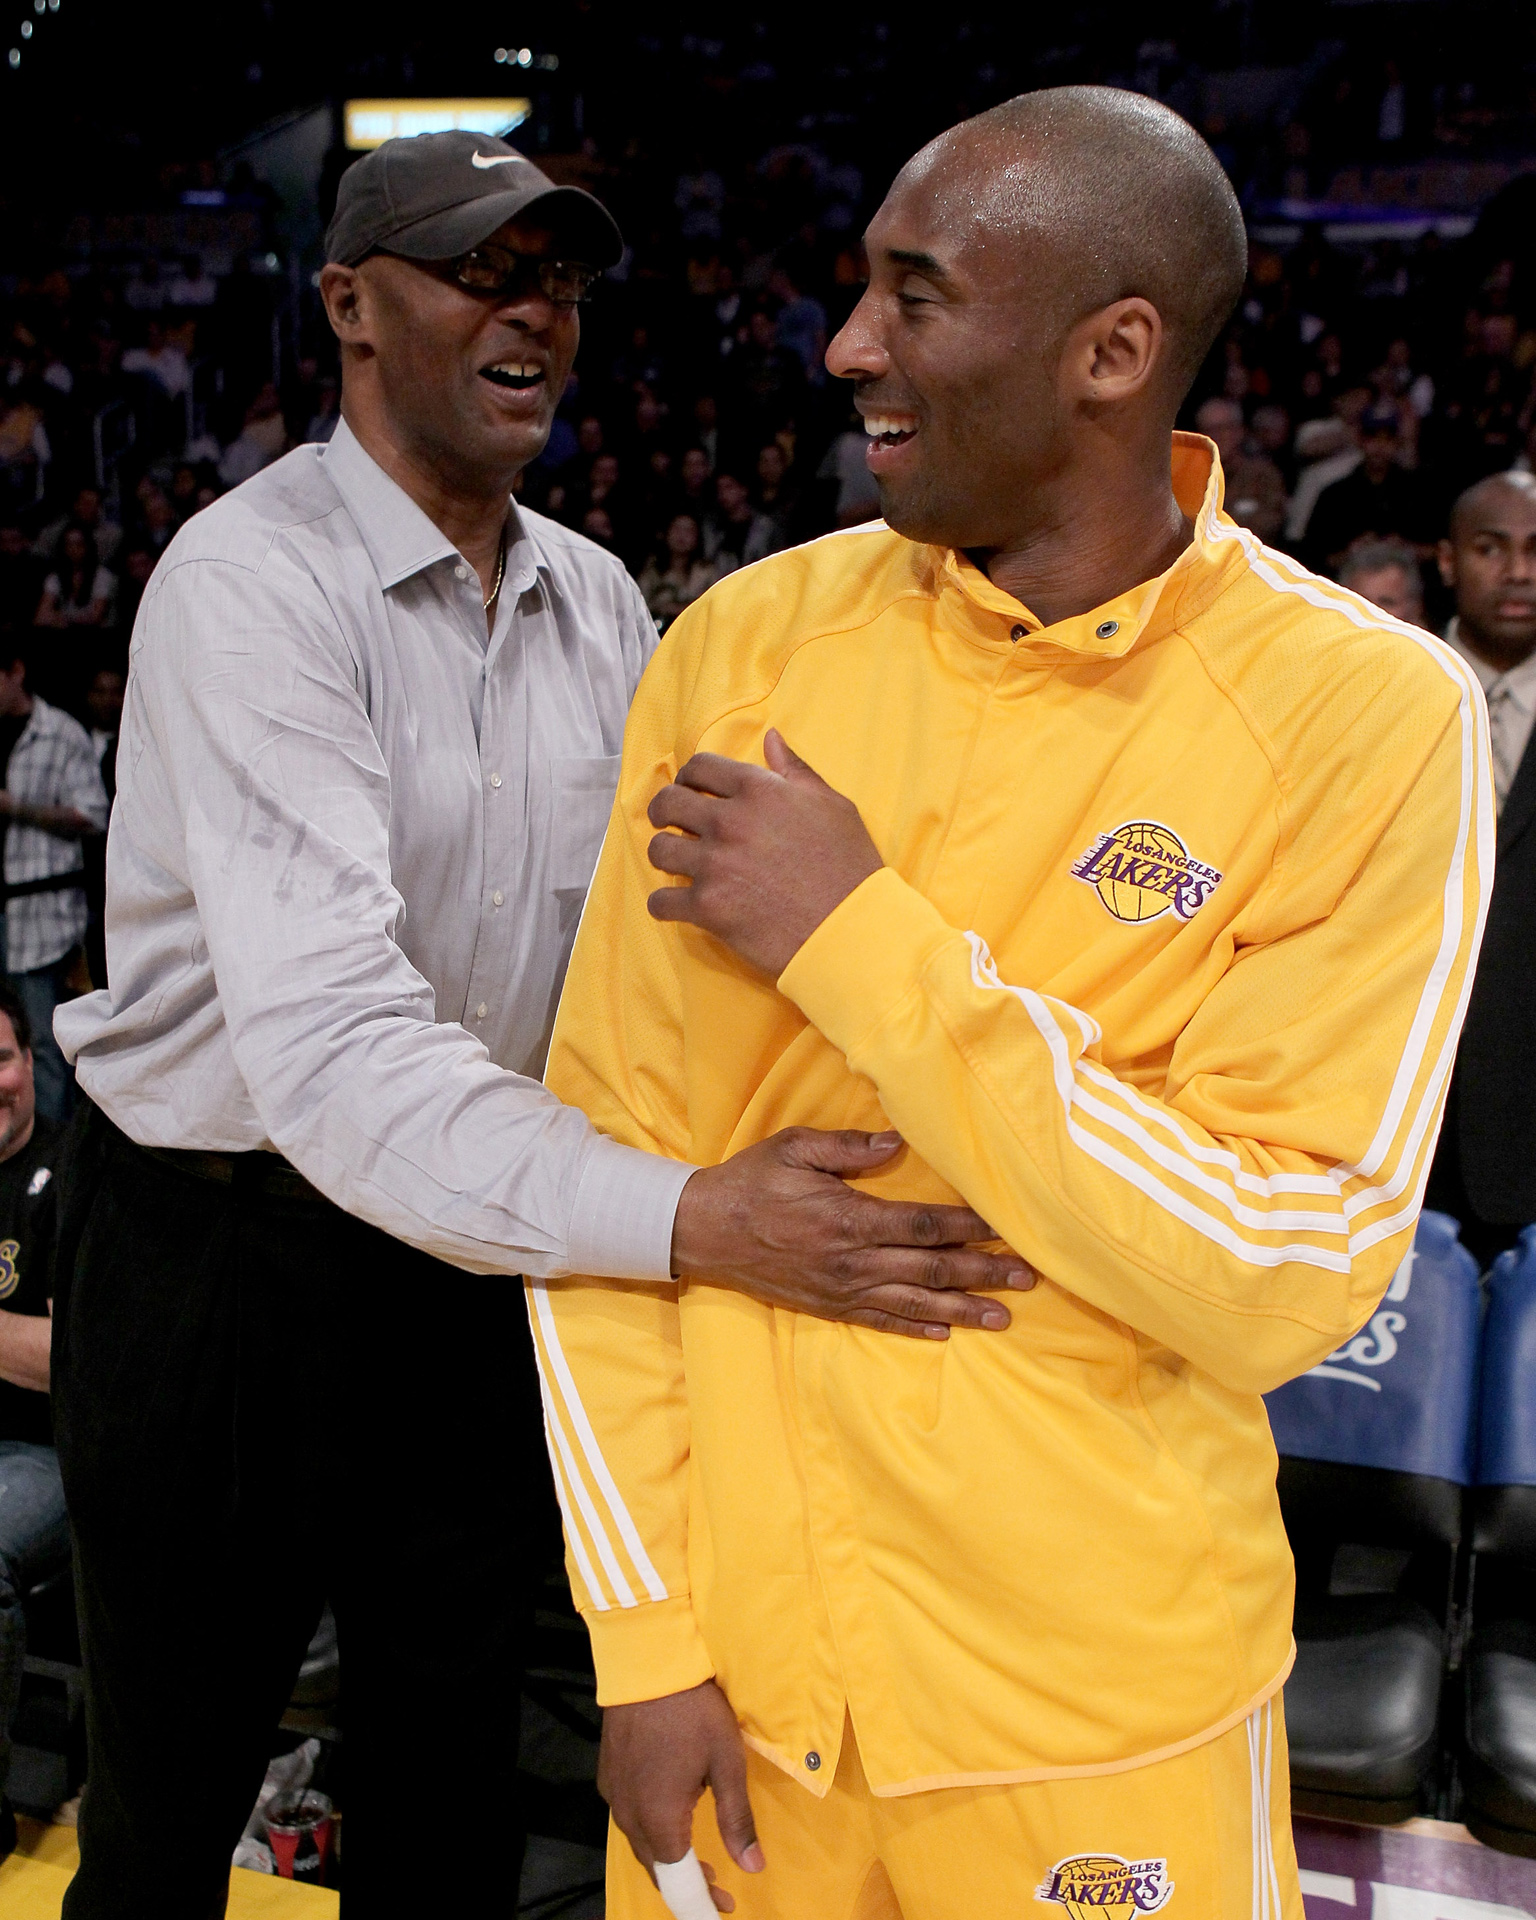 Top Sports Biography Wallpapers Images Pictures : Kobe Bryant1536 x 1920